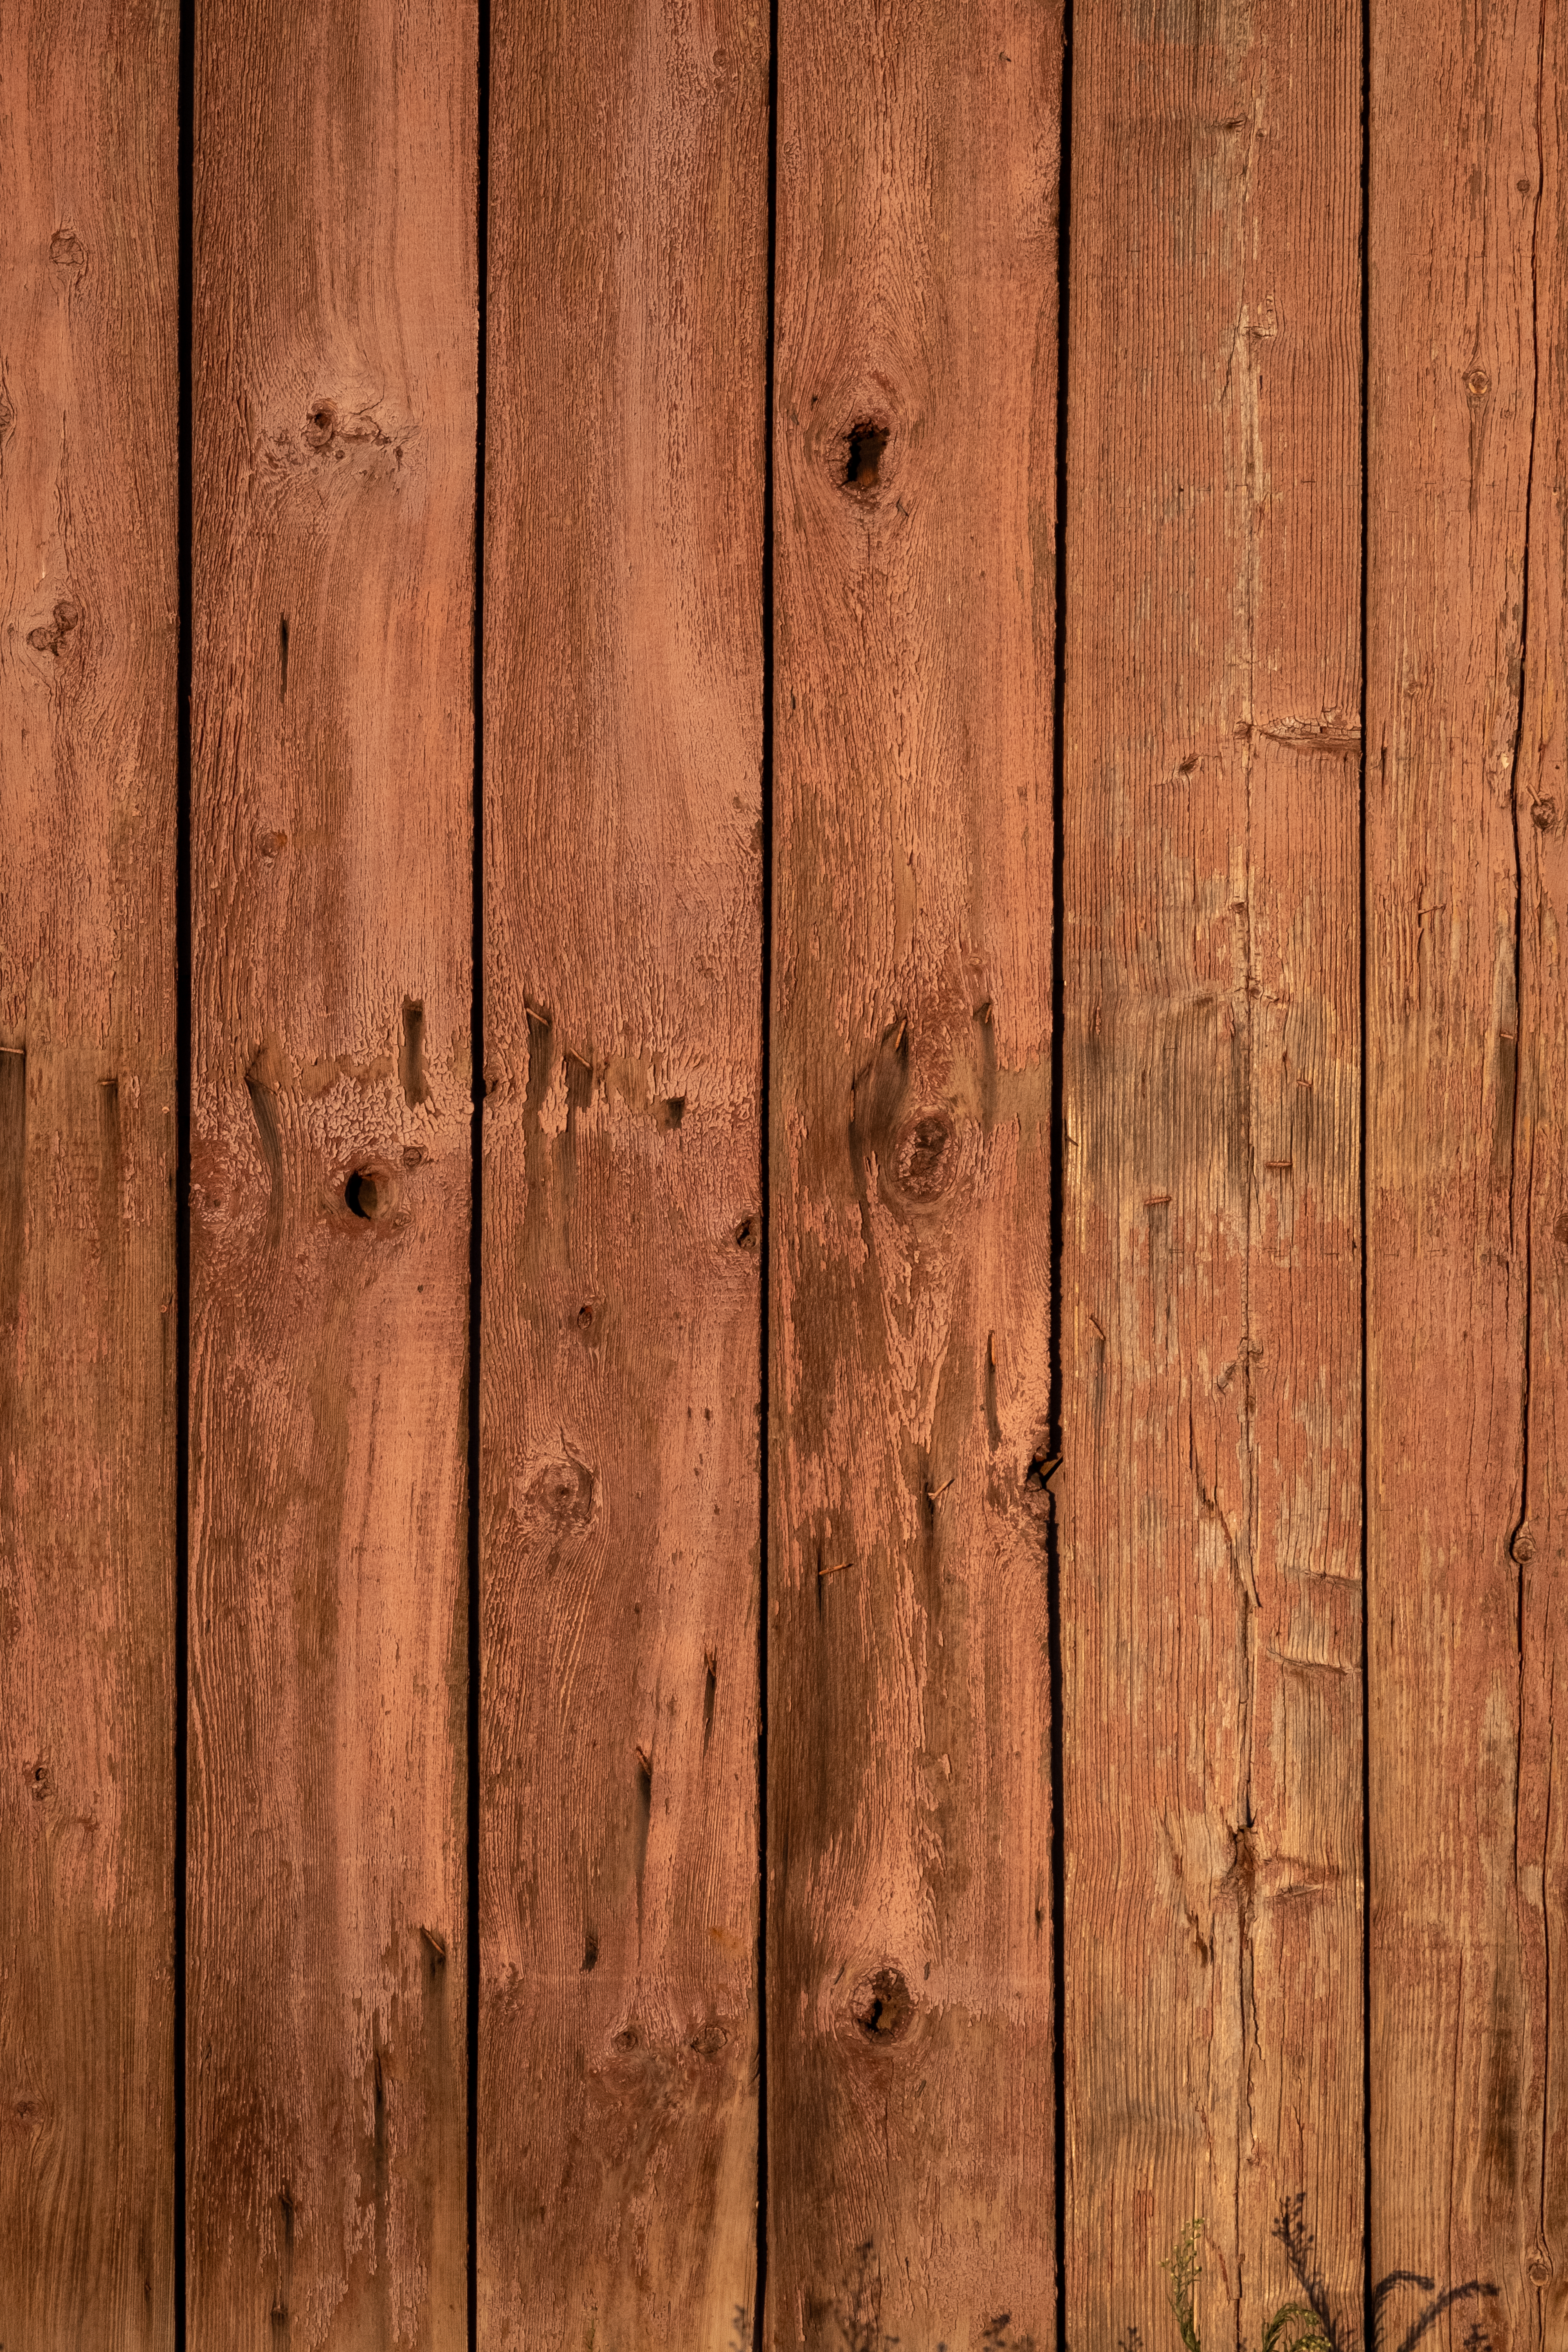 wooden, board, textures, paint, planks, wood, texture, brown, surface